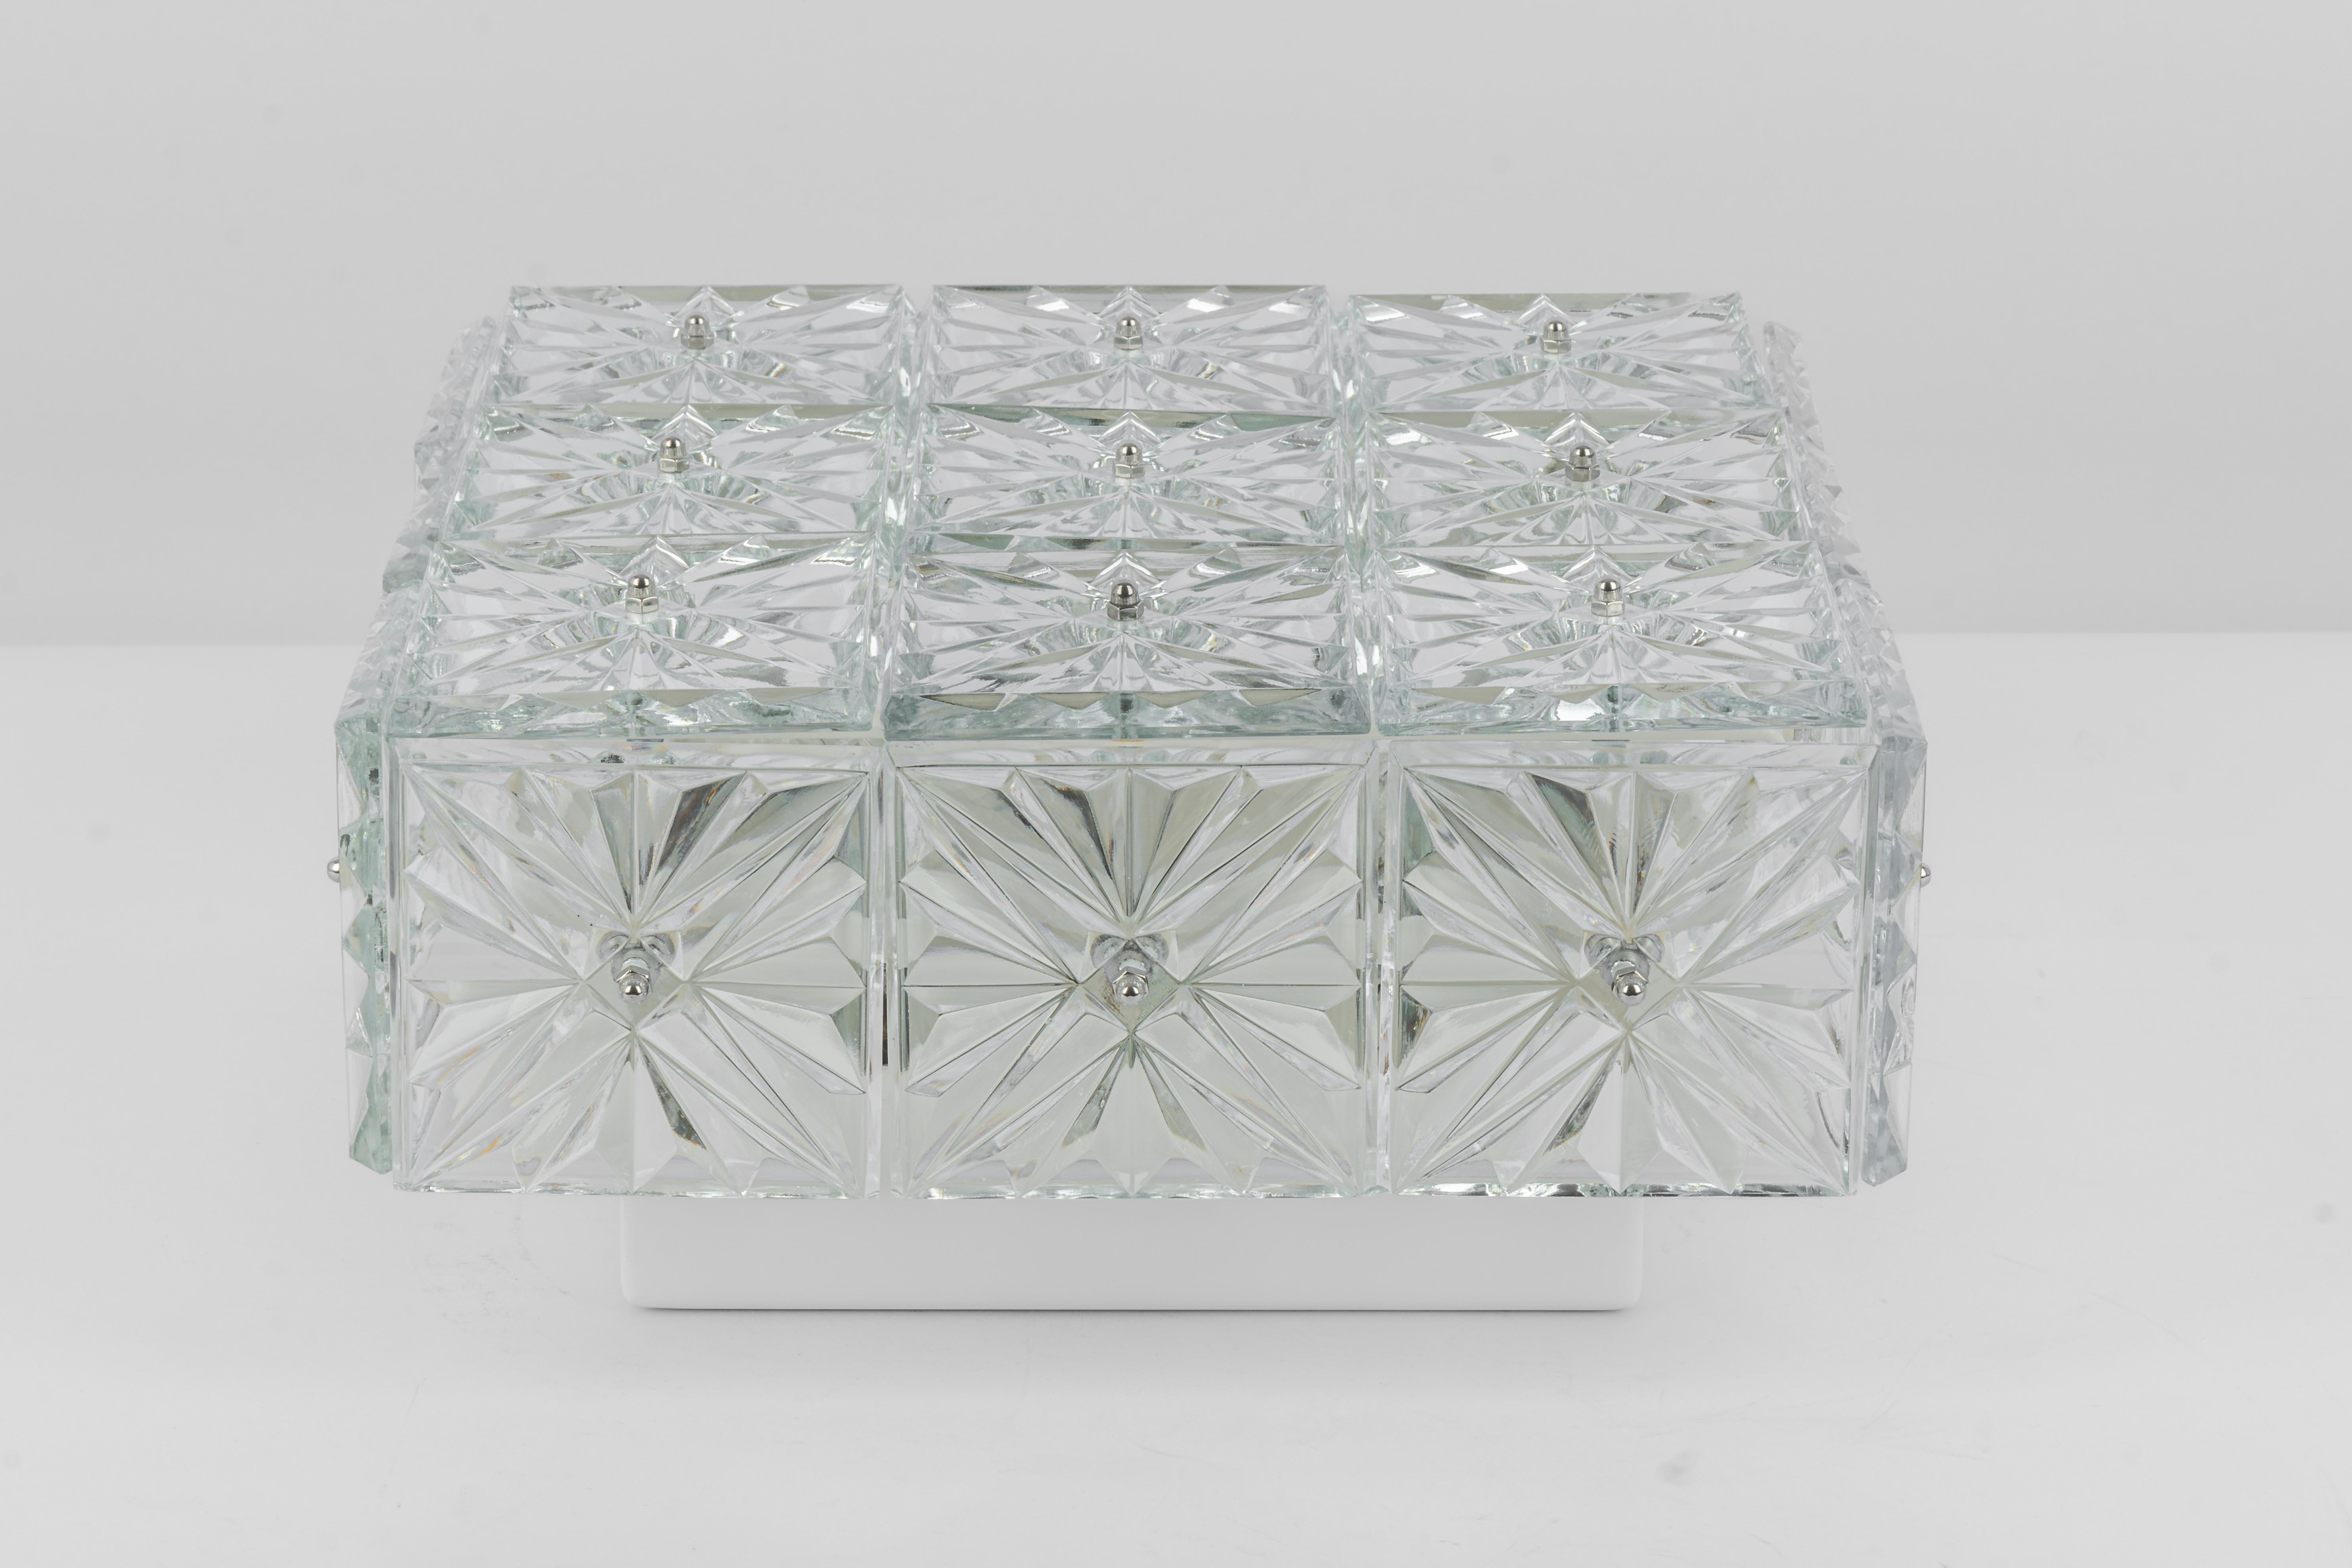 1 of 4 Large Flushmount Faceted Crystal Light Fixture, Germany, 1960s For Sale 8